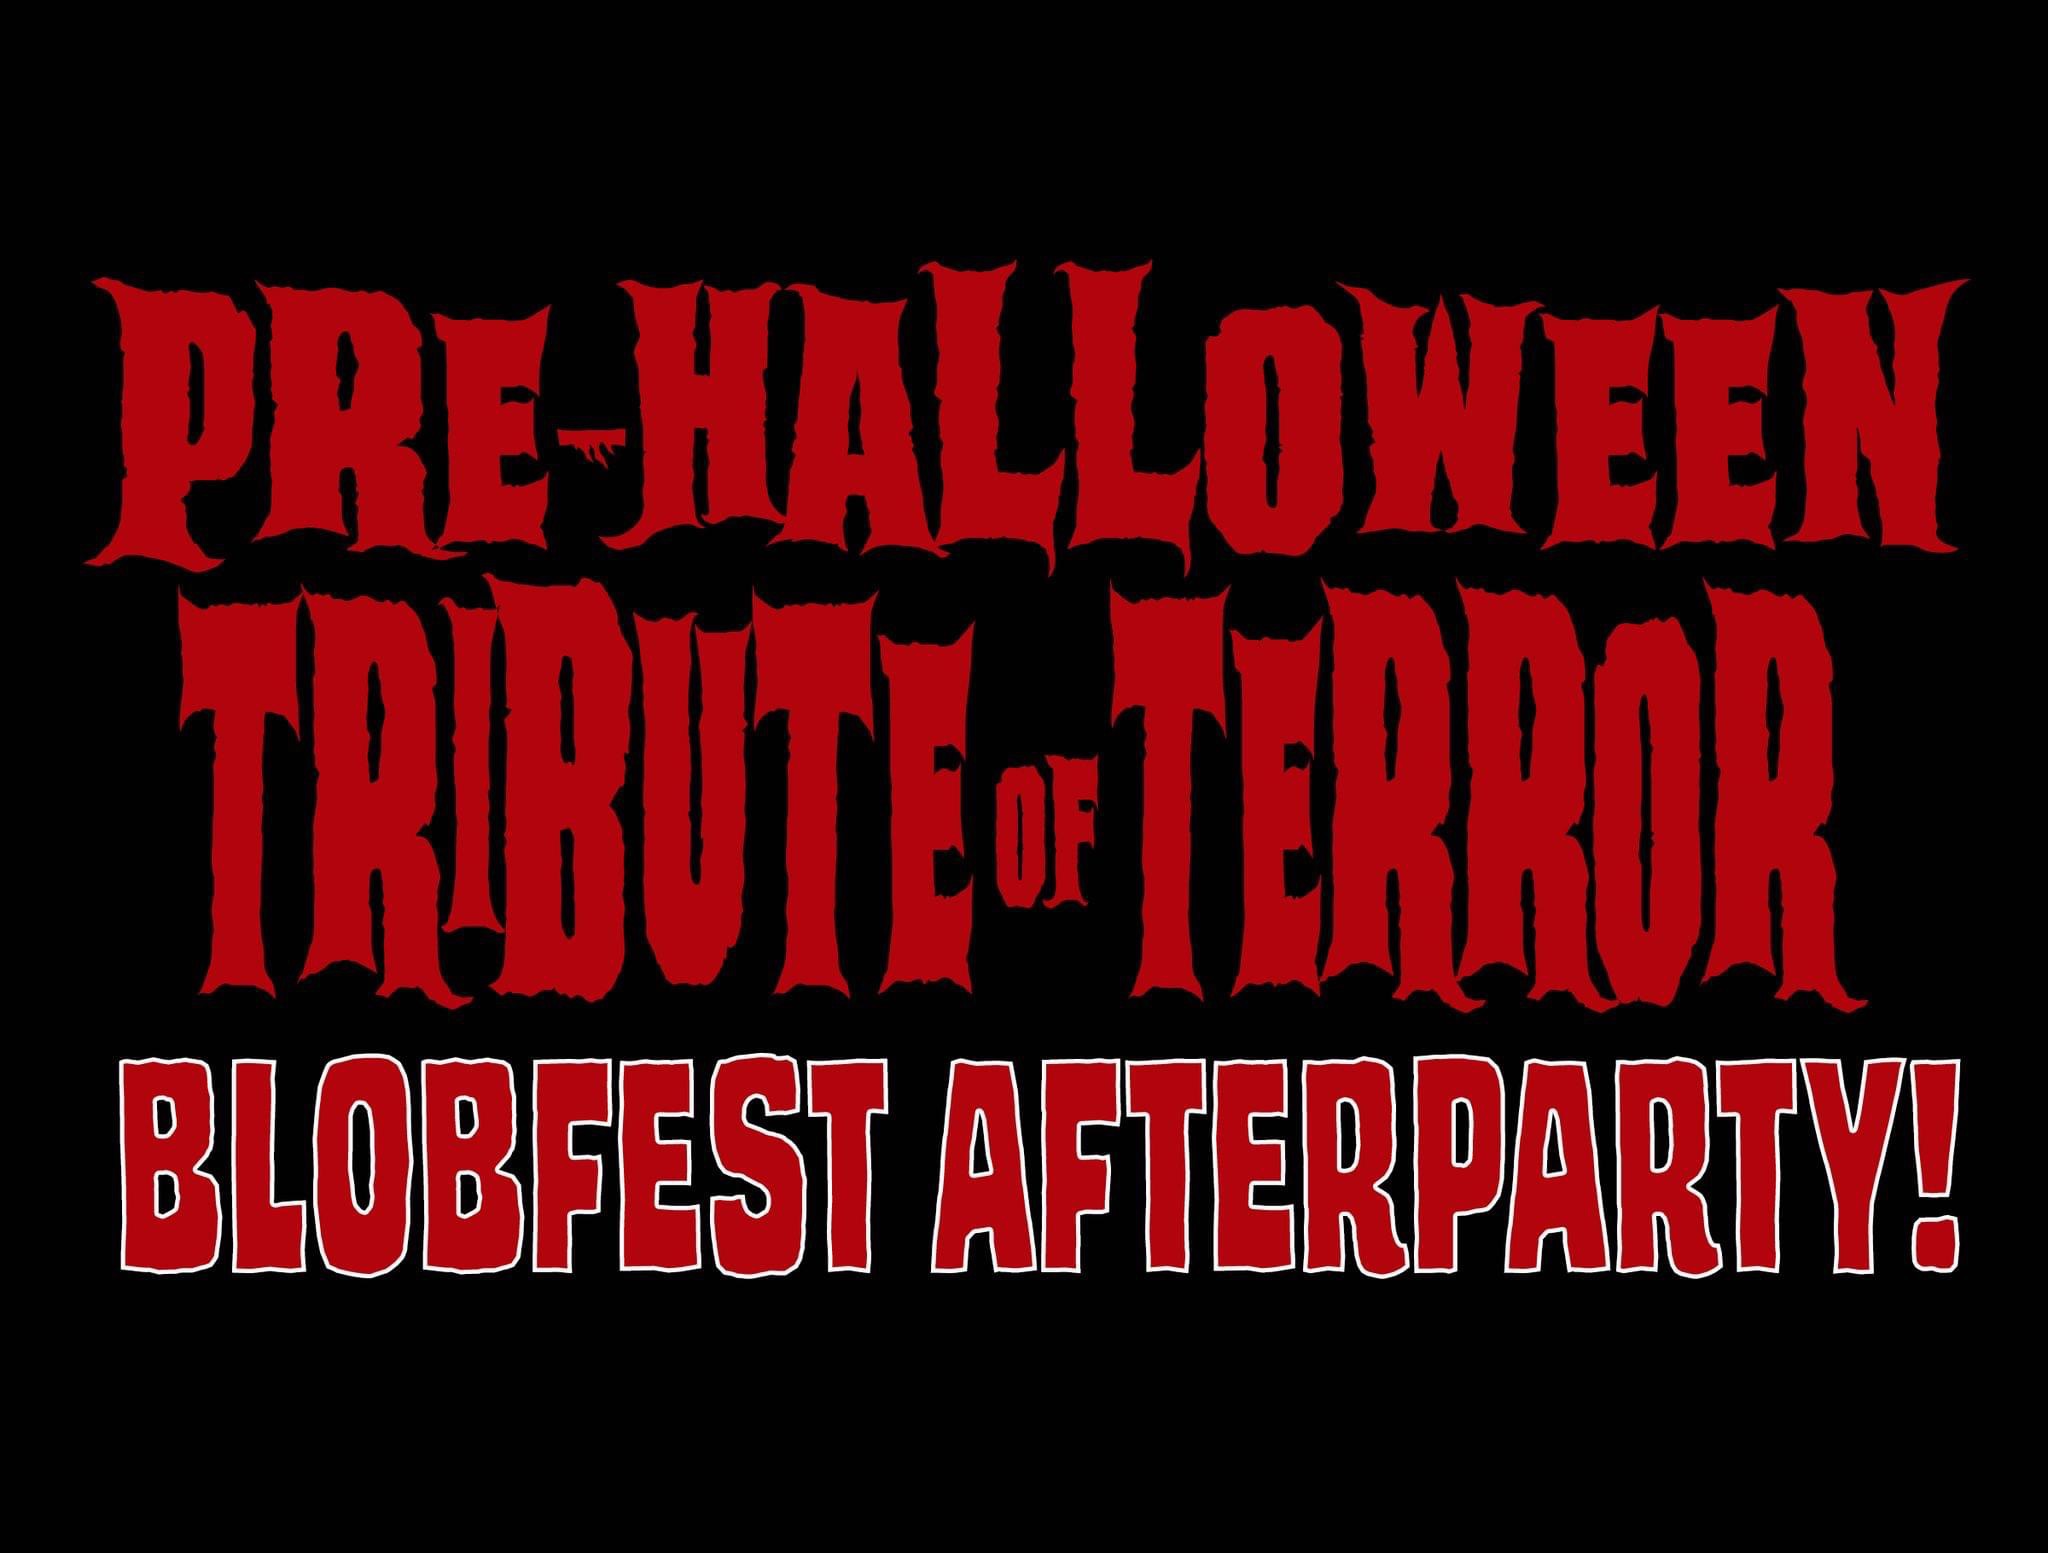 Pre-Halloween Tribute of Terror & Blobfest Afterparty